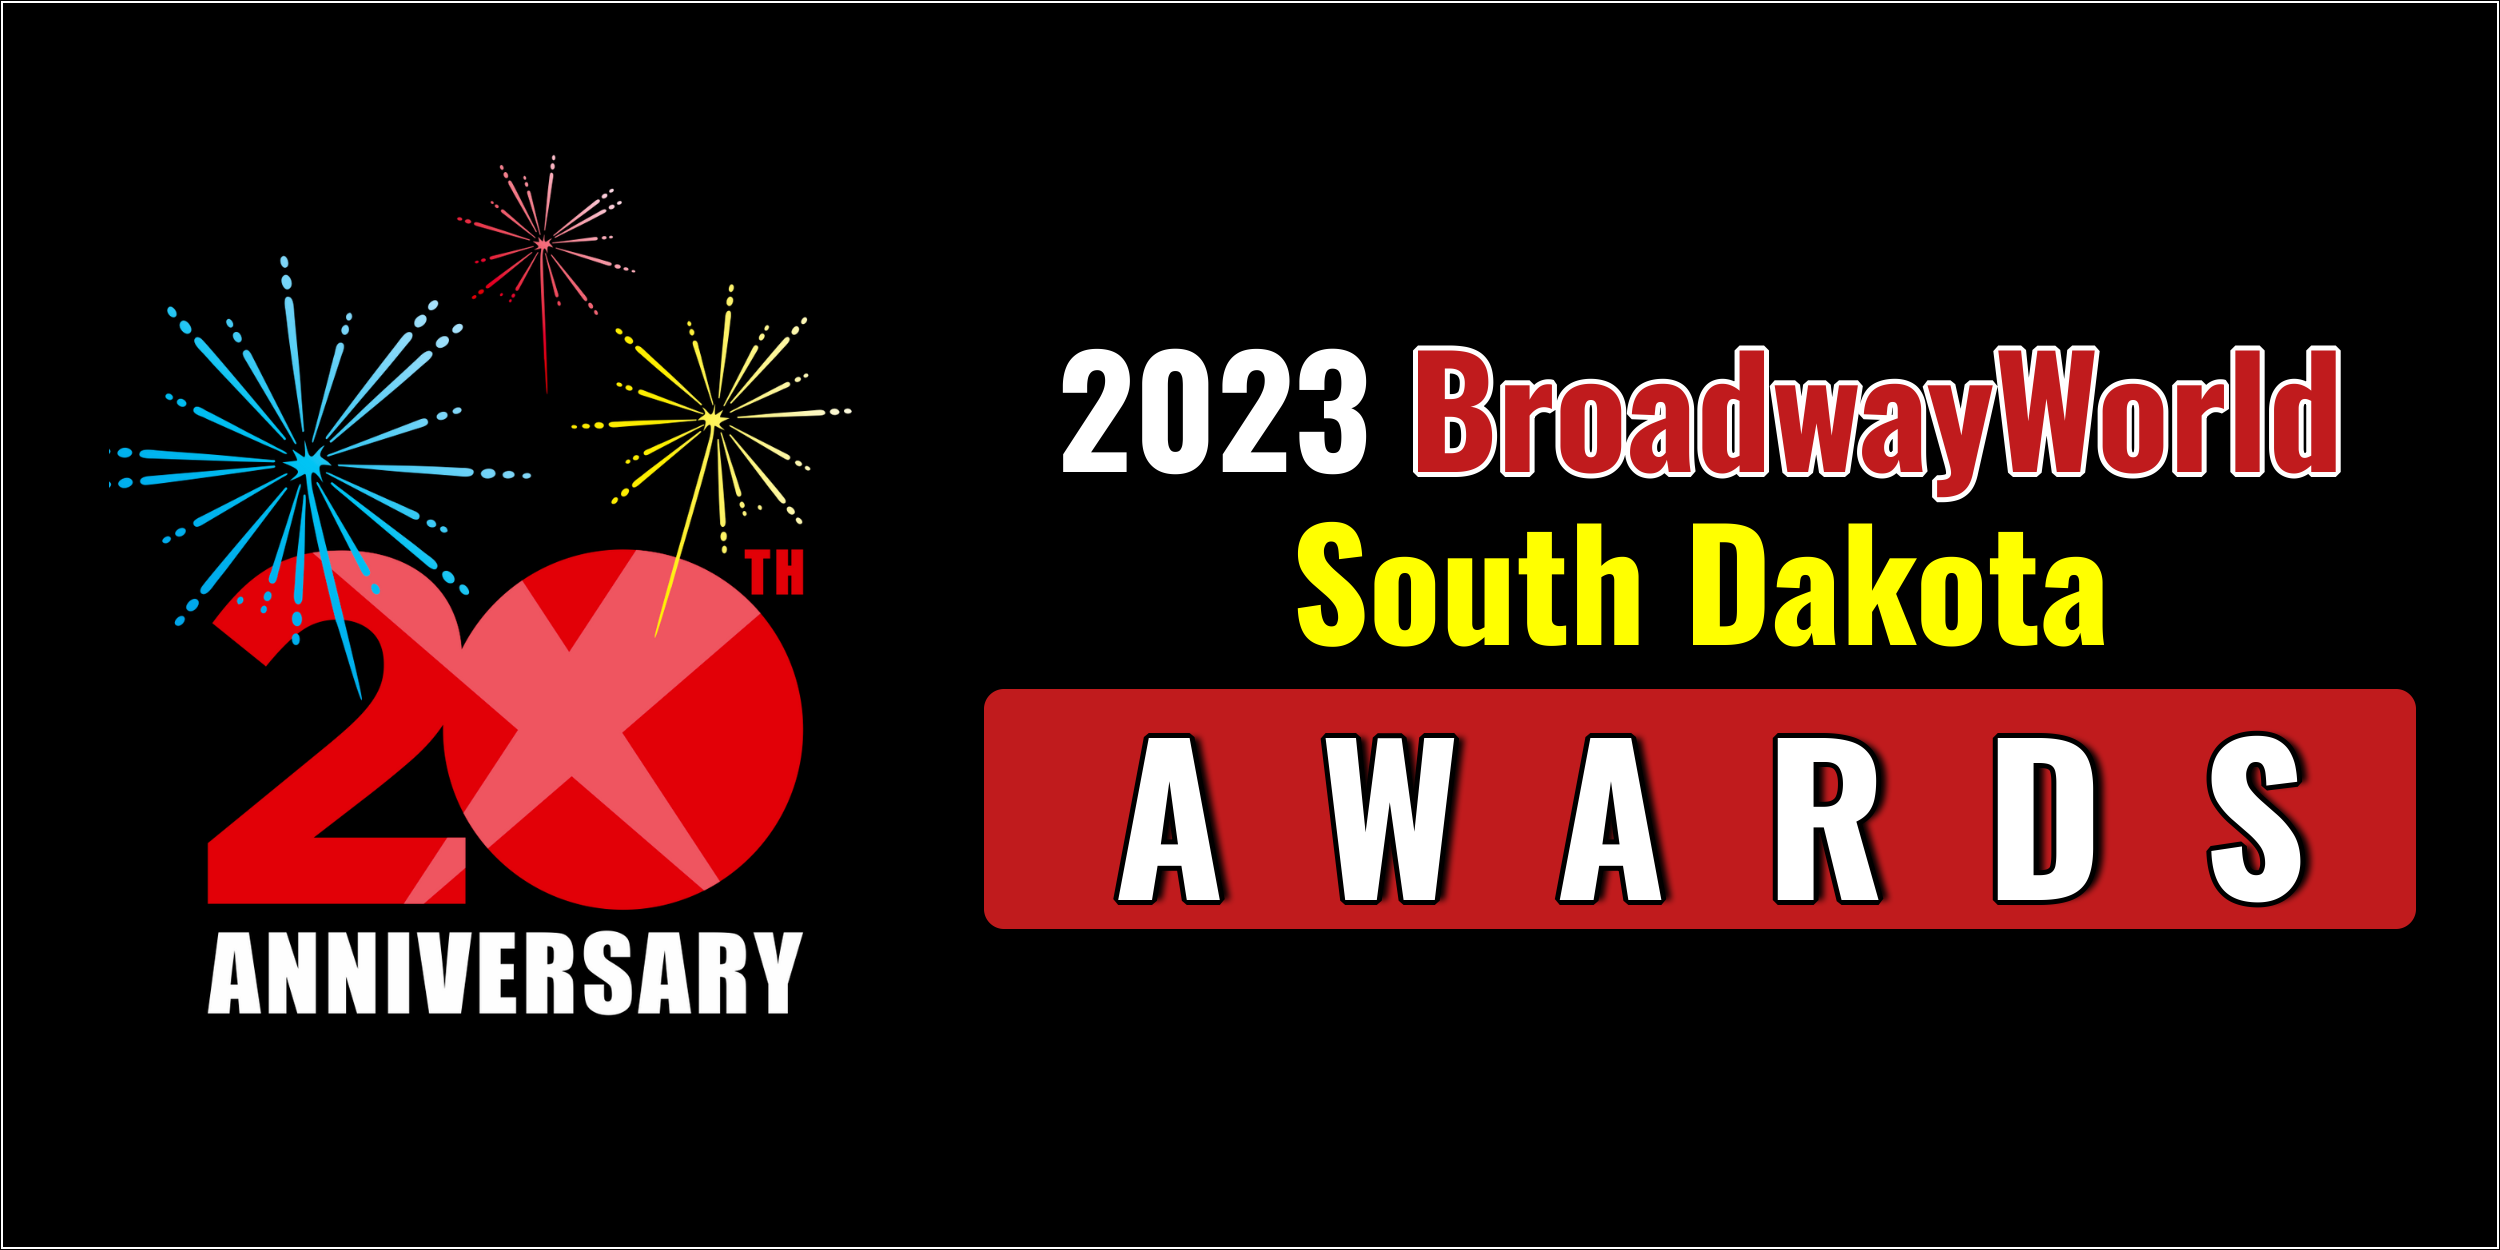 Latest Standings Announced For The 2023 BroadwayWorld South Dakota Awards; MURDER ON THE ORIENT EXPRESS Leads Best Play! 